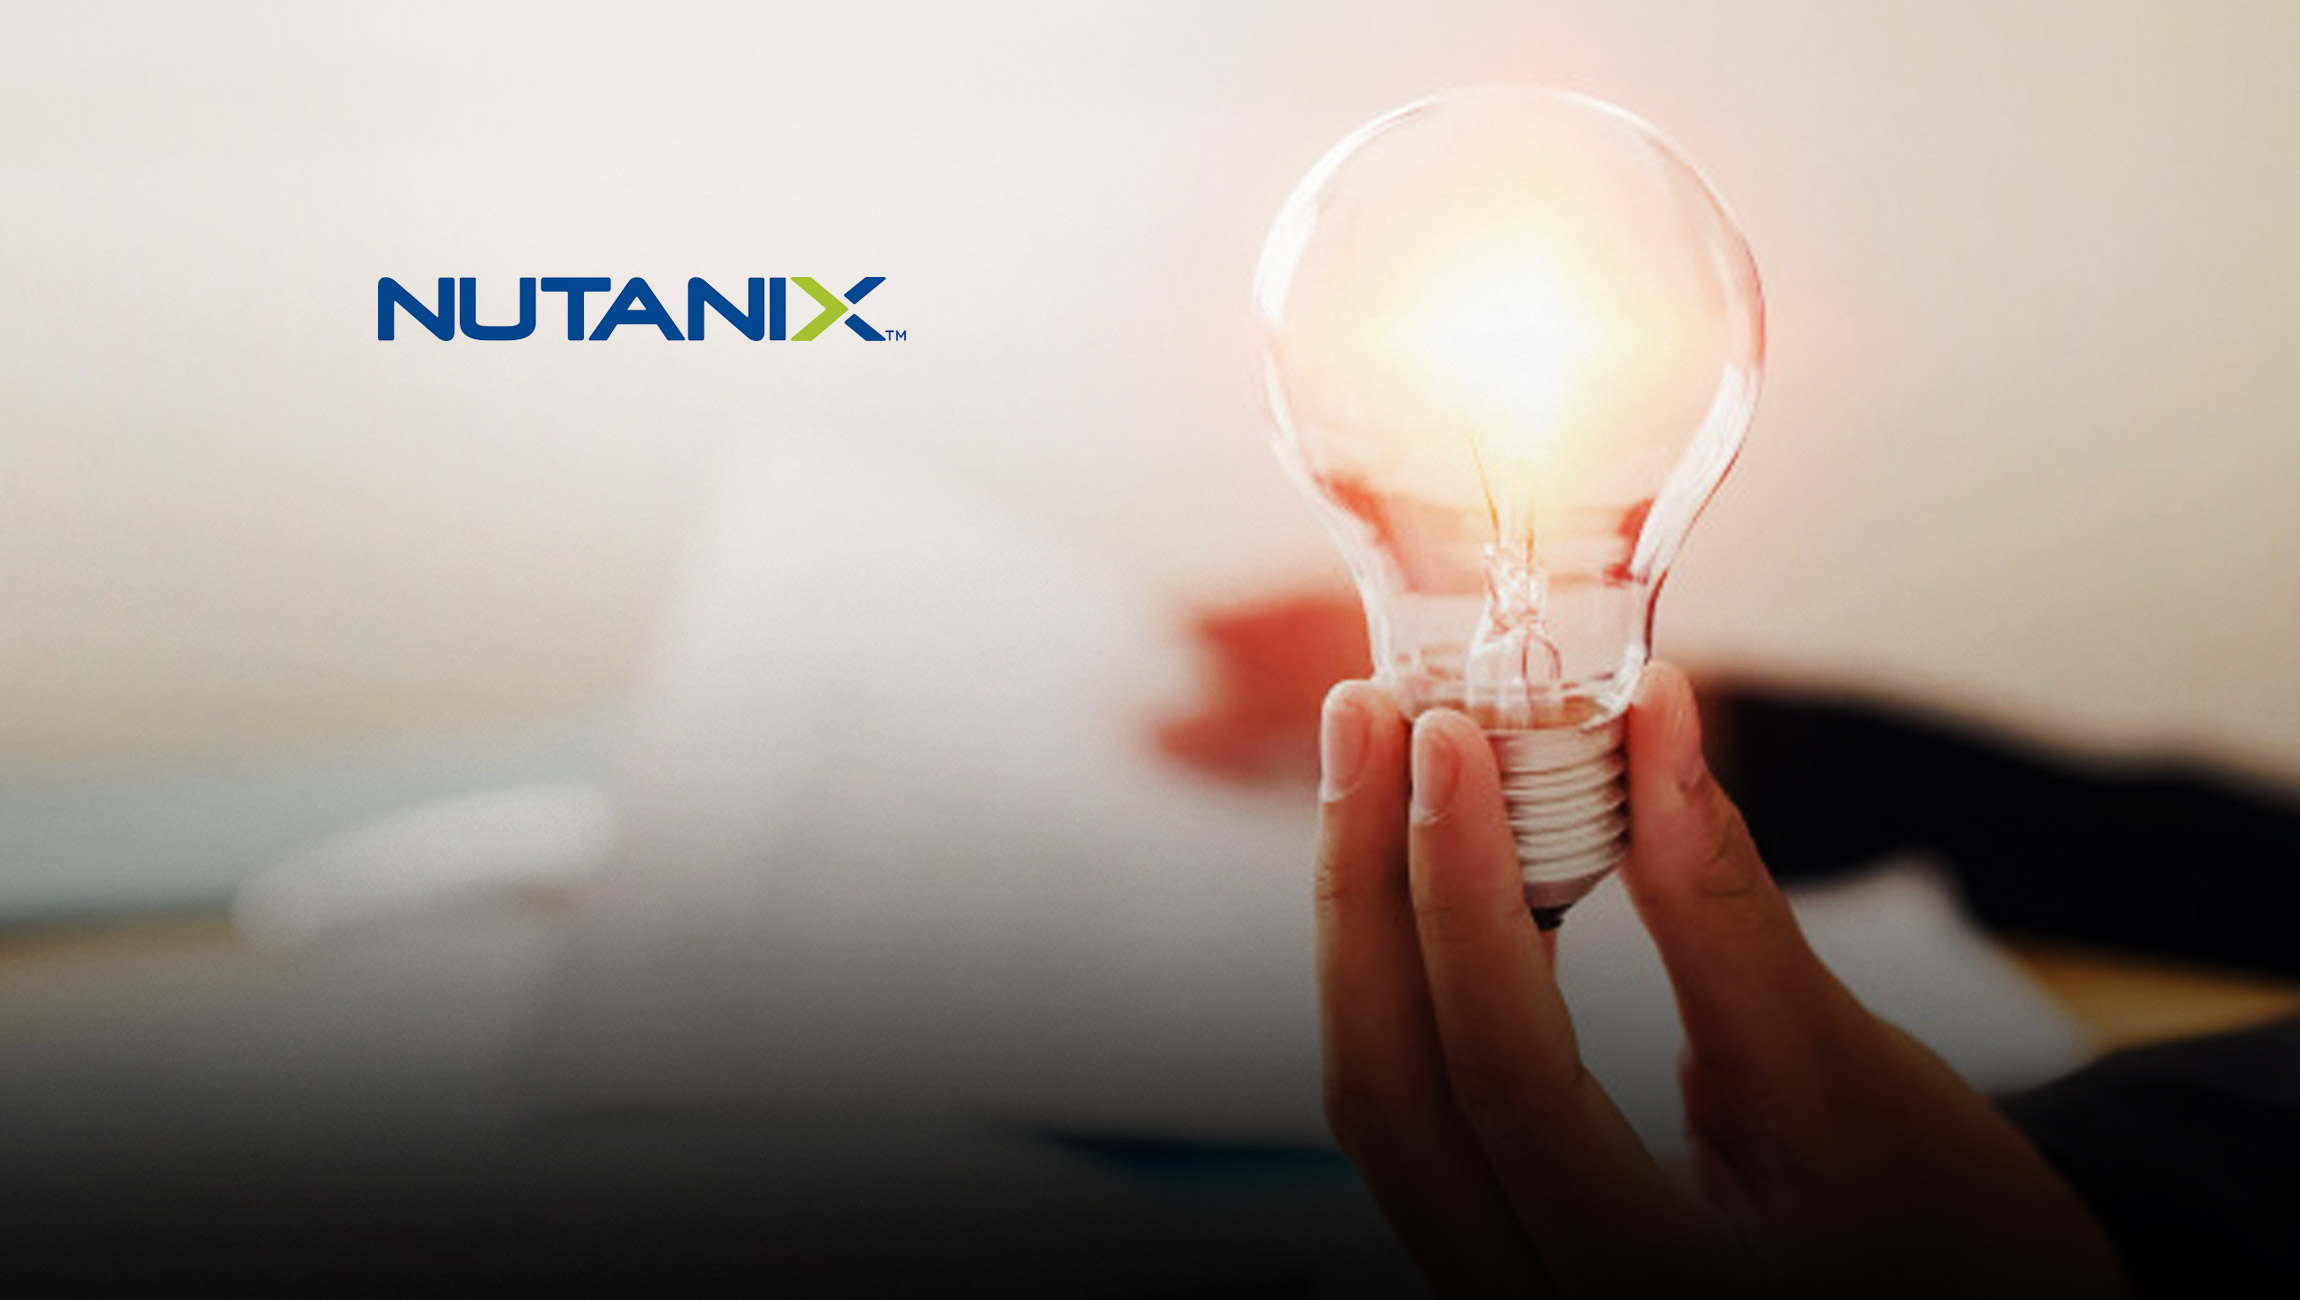 Nutanix-Named-a-Leader-in-Gartner-Magic-Quadrant-for-Hyperconverged-Infrastructure-Software-for-Fourth-Year-in-a-Row